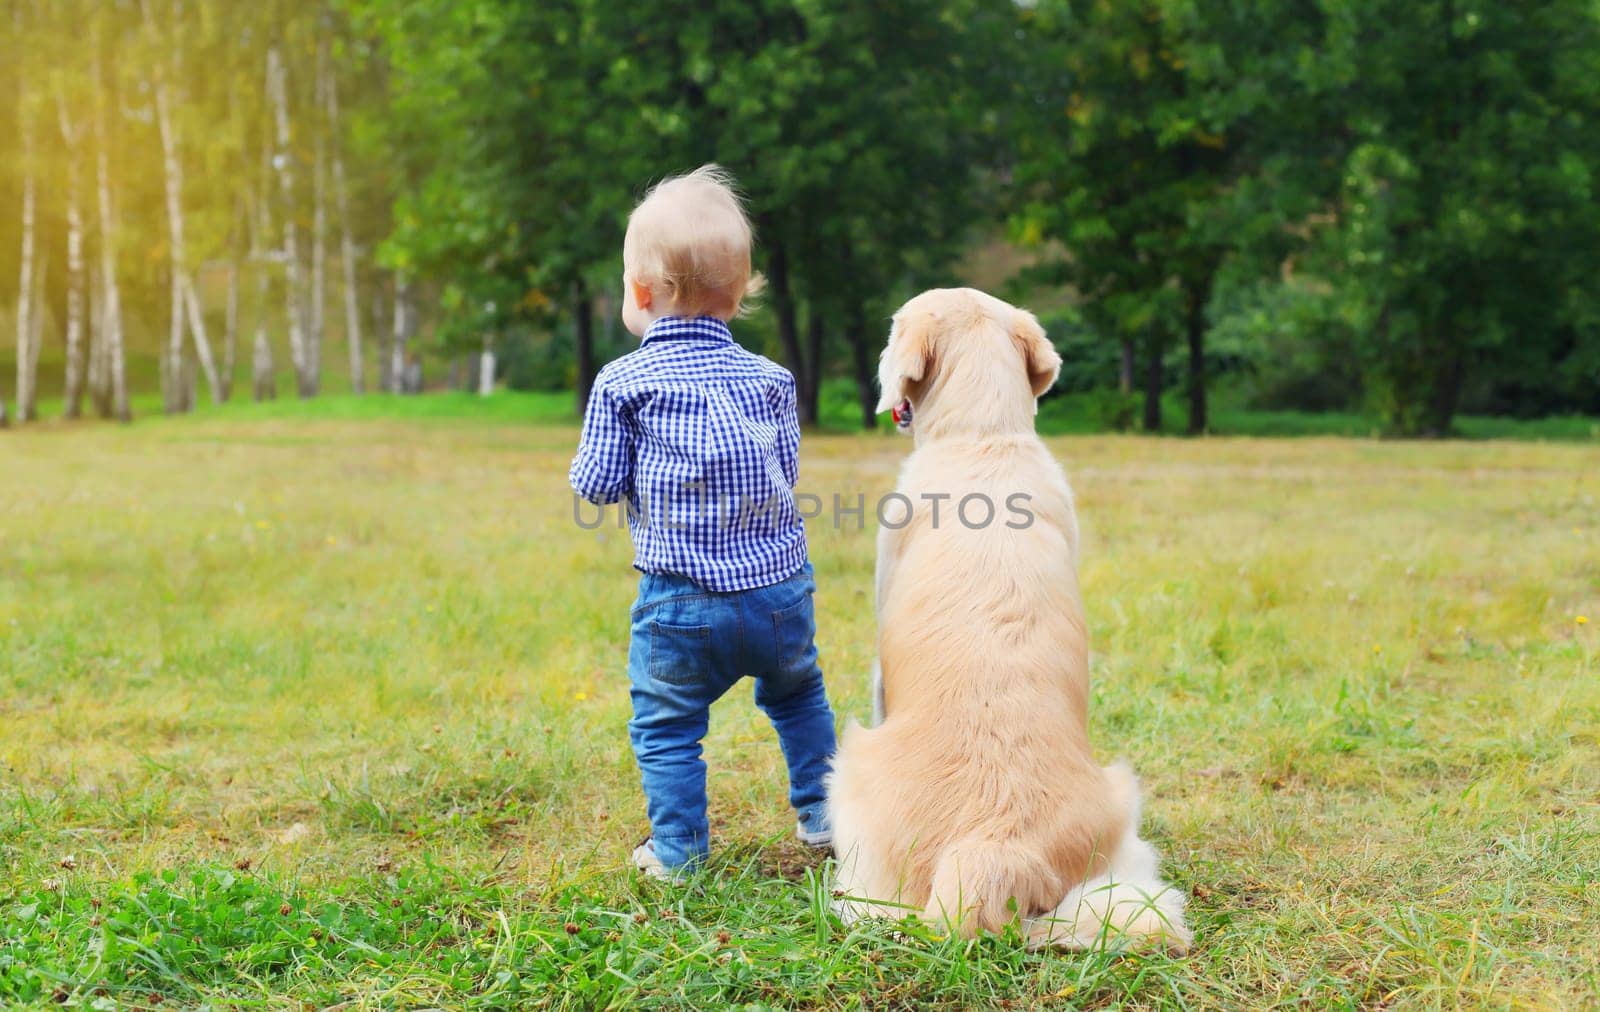 Child and Golden Retriever dog obedient sitting together in summer park by Rohappy